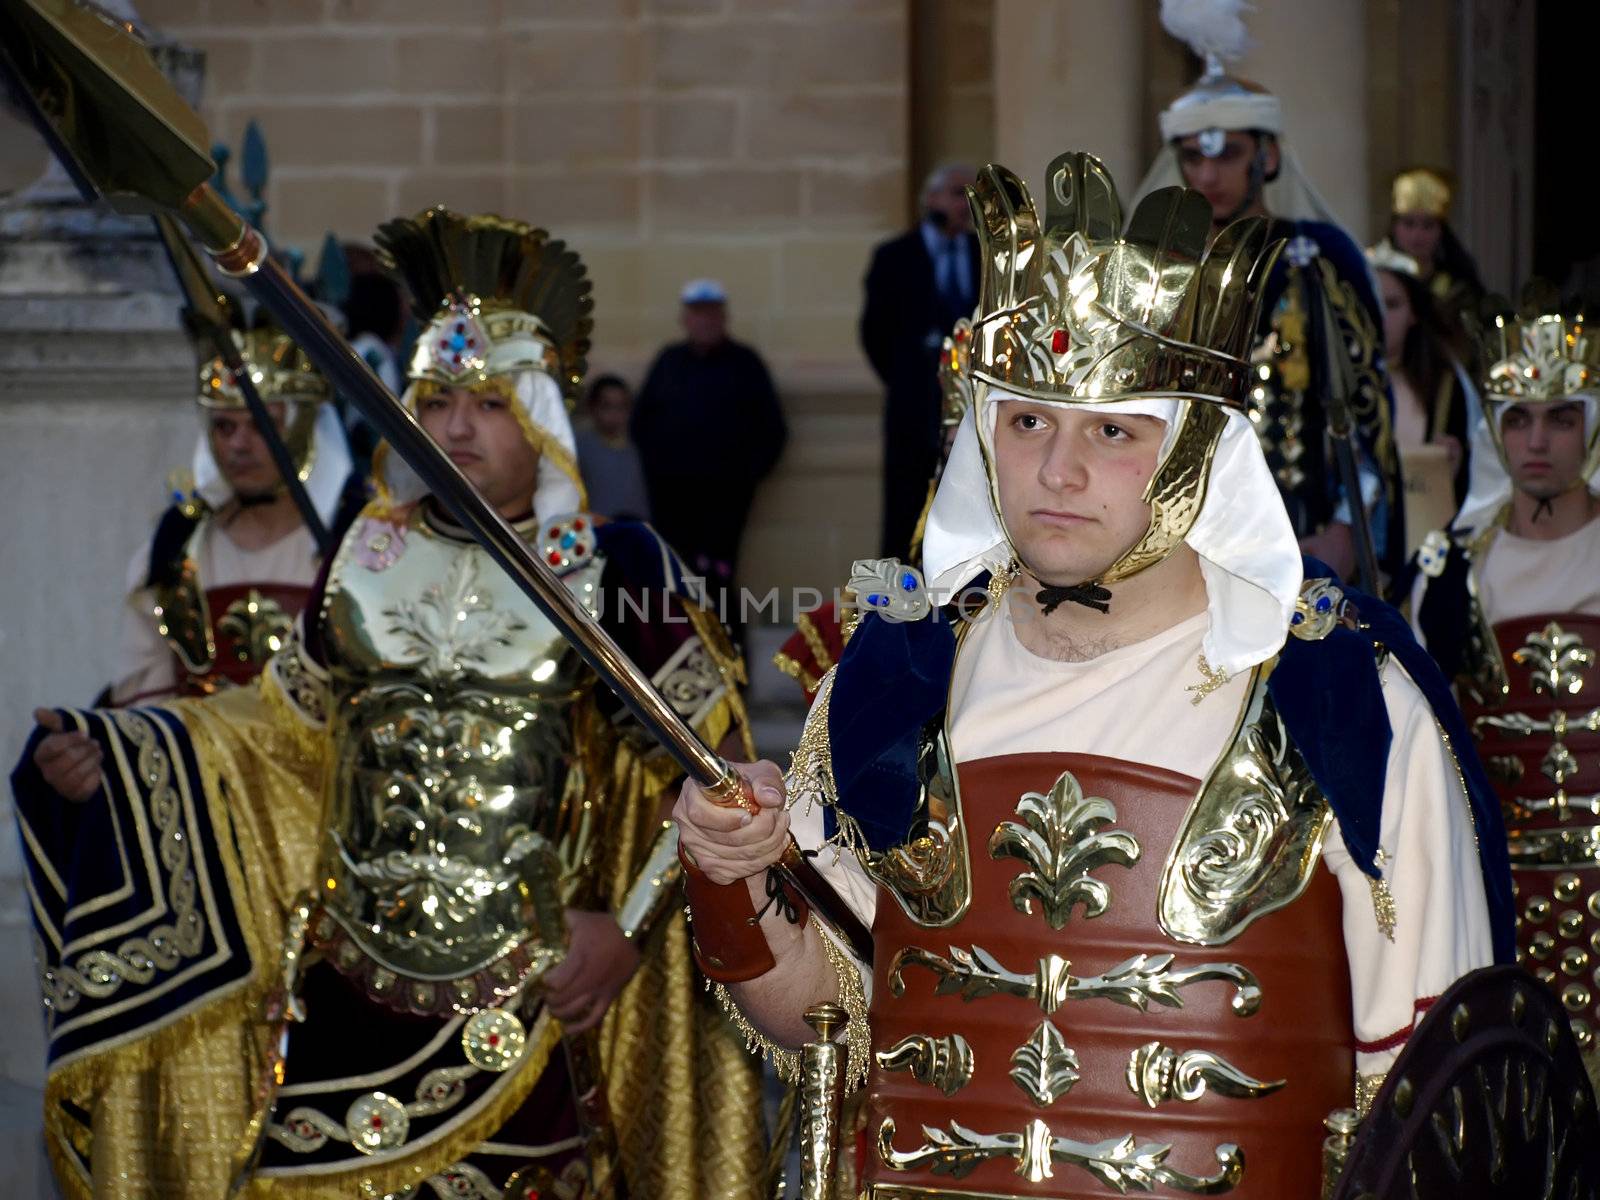 Man dressed up as a soldier of Herod during Biblical times  